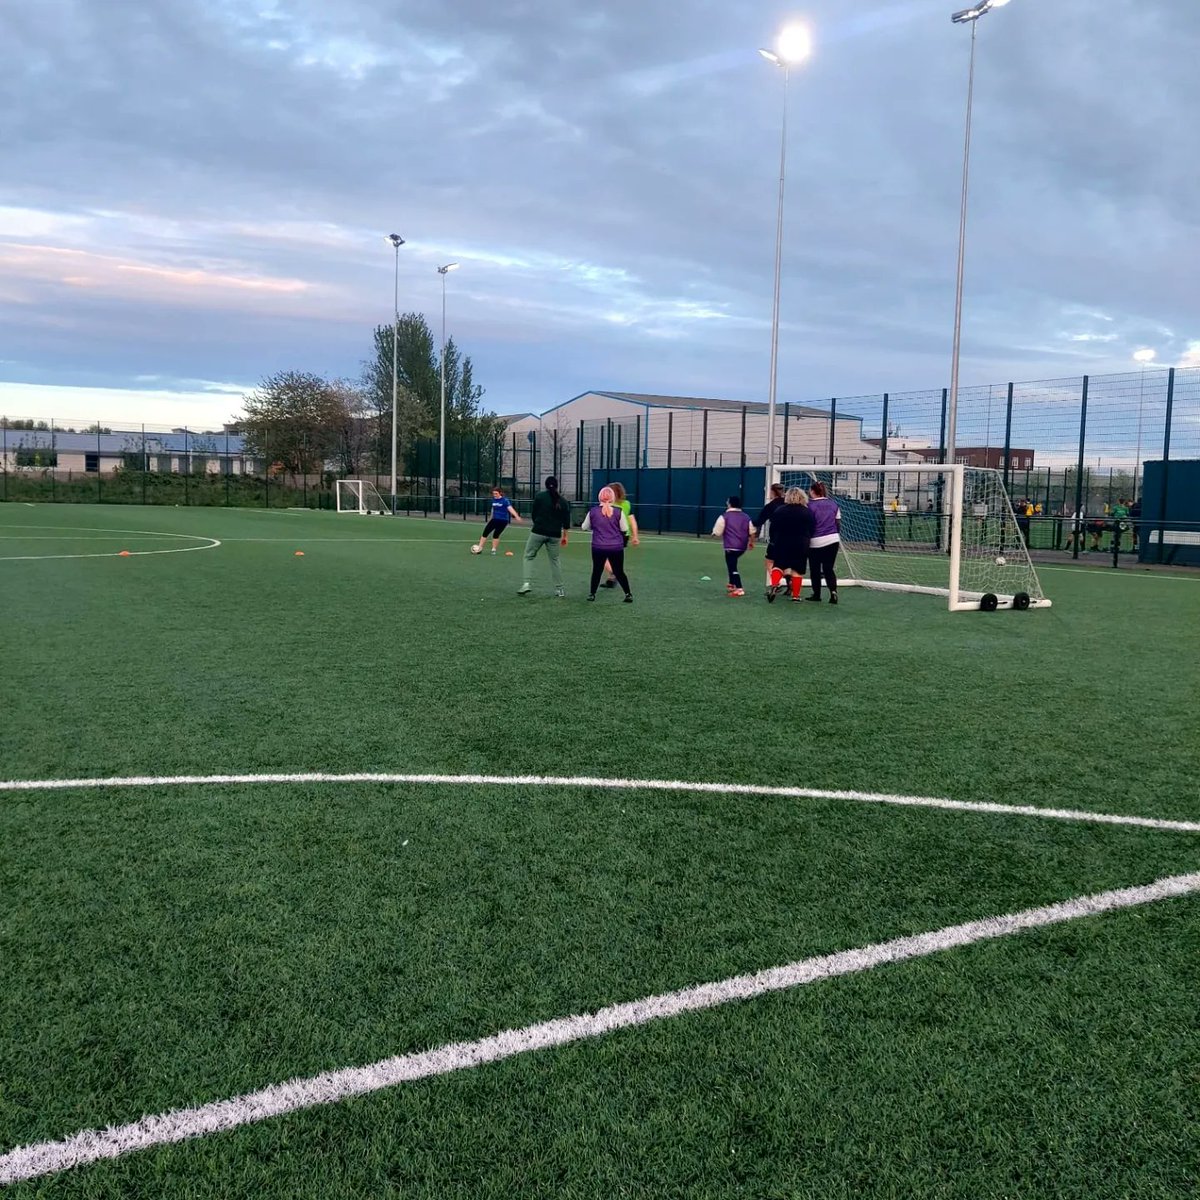 Lovely chilled training session yesterday! Great to see some new players joining us 🤩

#inclusivefootball #hergametoo #footballvhomophobia #footballvtransphobia #footballforall #footballforeveryone #NoFootballWithoutTheT #hopebeatshate #ymaohyd